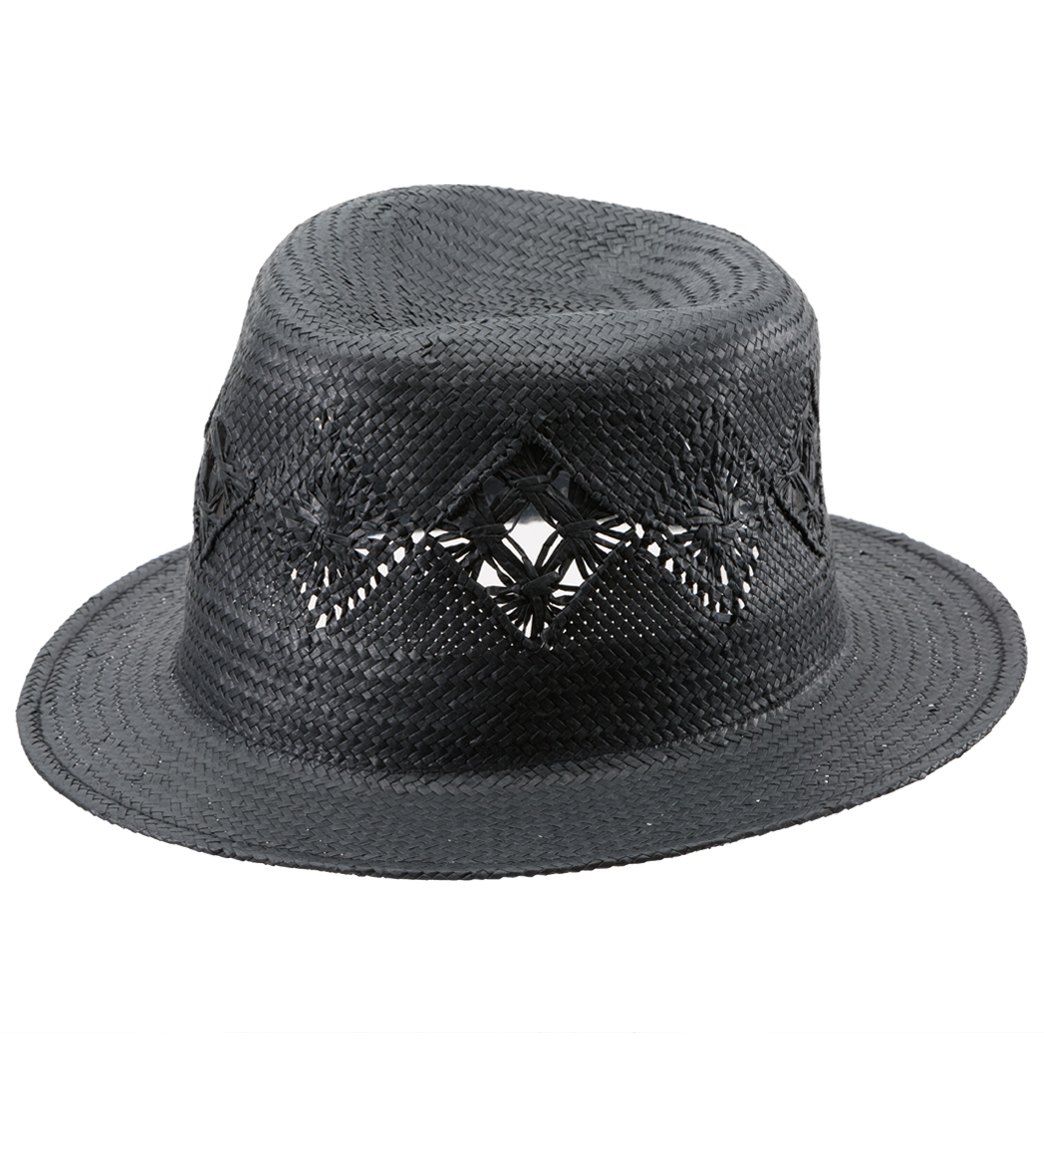 Physician Endorsed Cady Adjustable Panama Hat - Black Straw - Swimoutlet.com